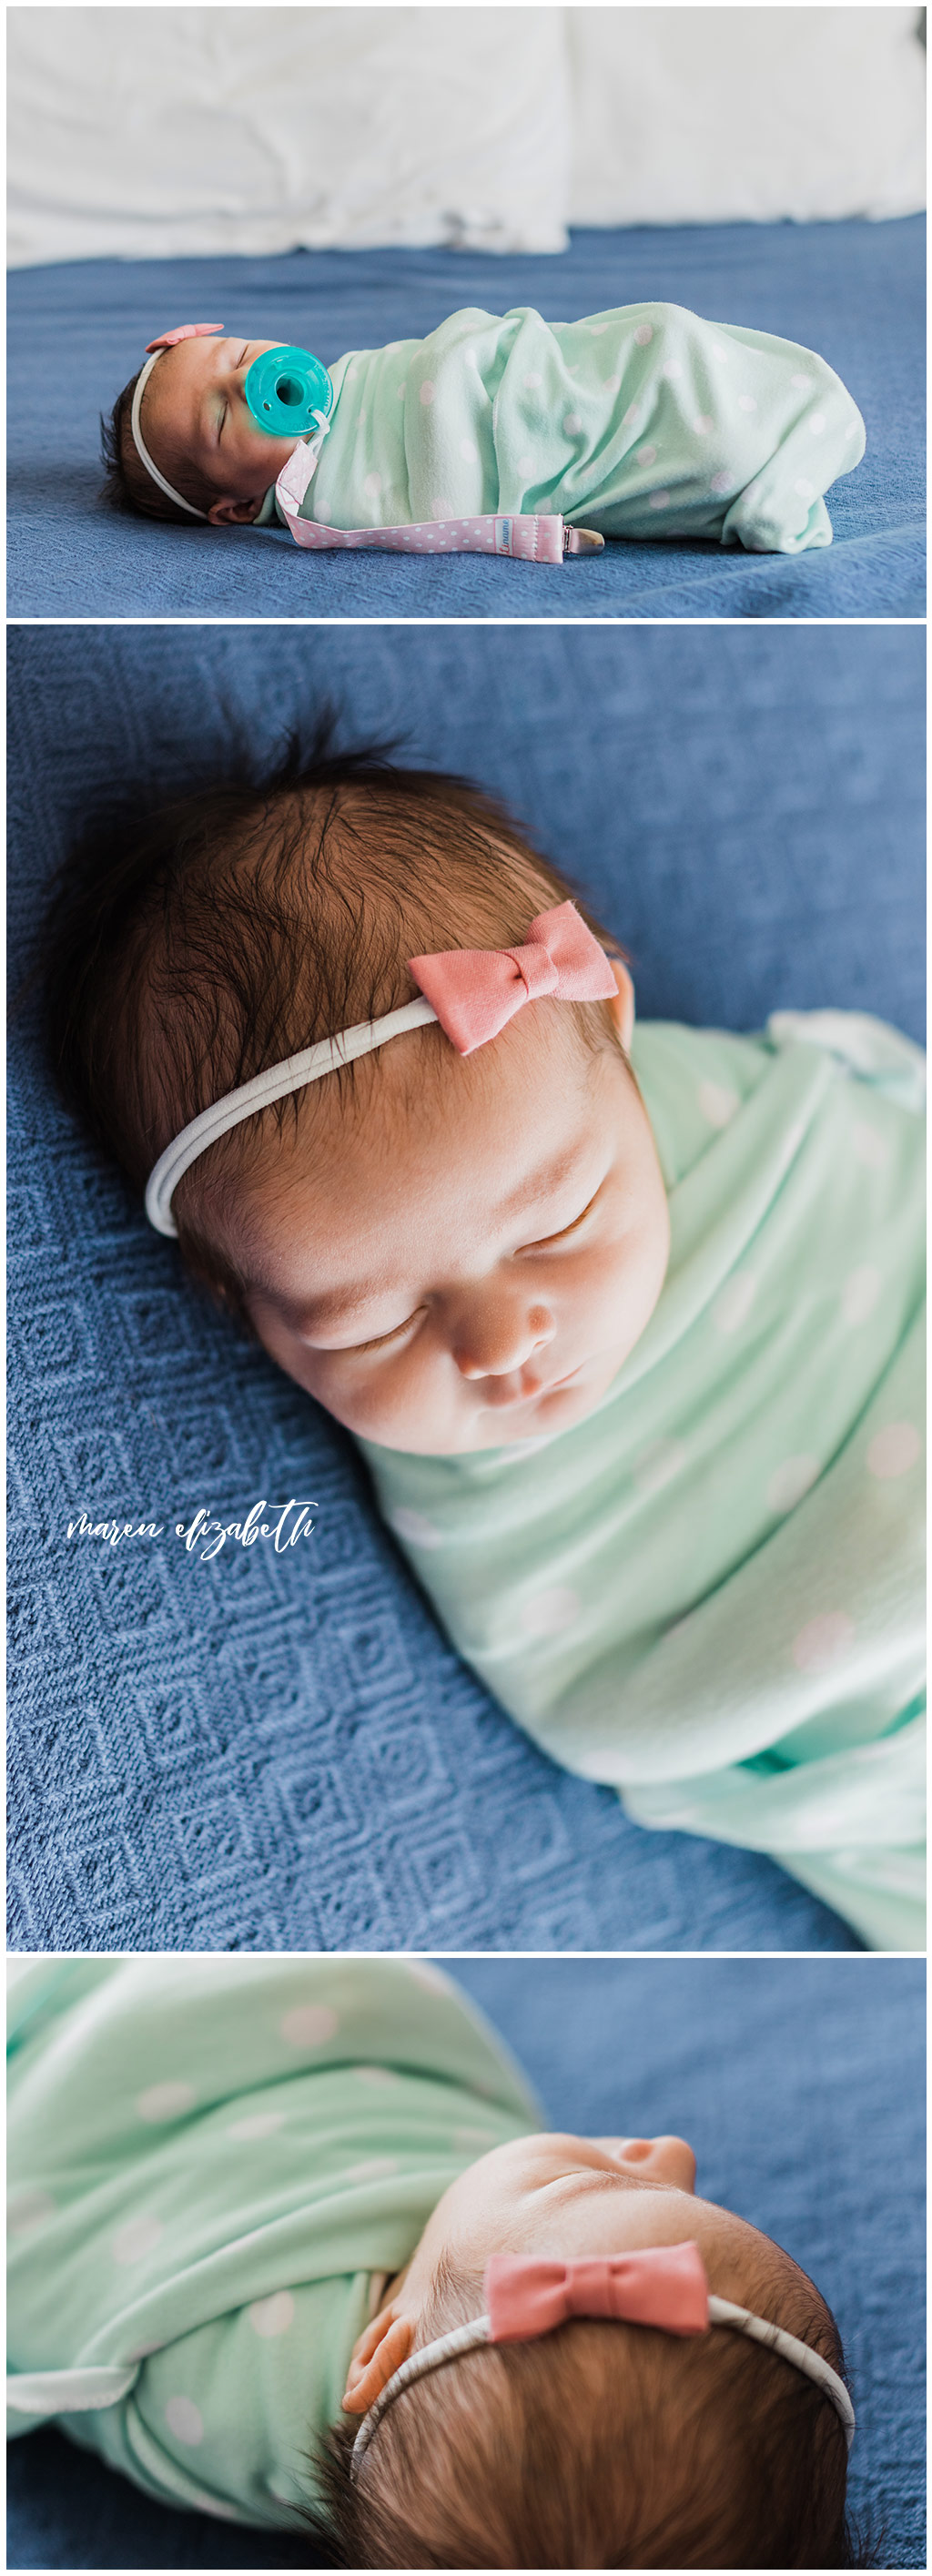 I get asked "What should our newborn wear in pictures?" Here are a couple practical tips on how to dress your newborn for pictures plus my #1 tip you'd probably never think of. | Maren Elizabeth Photography | Arizona Newborn Photographer